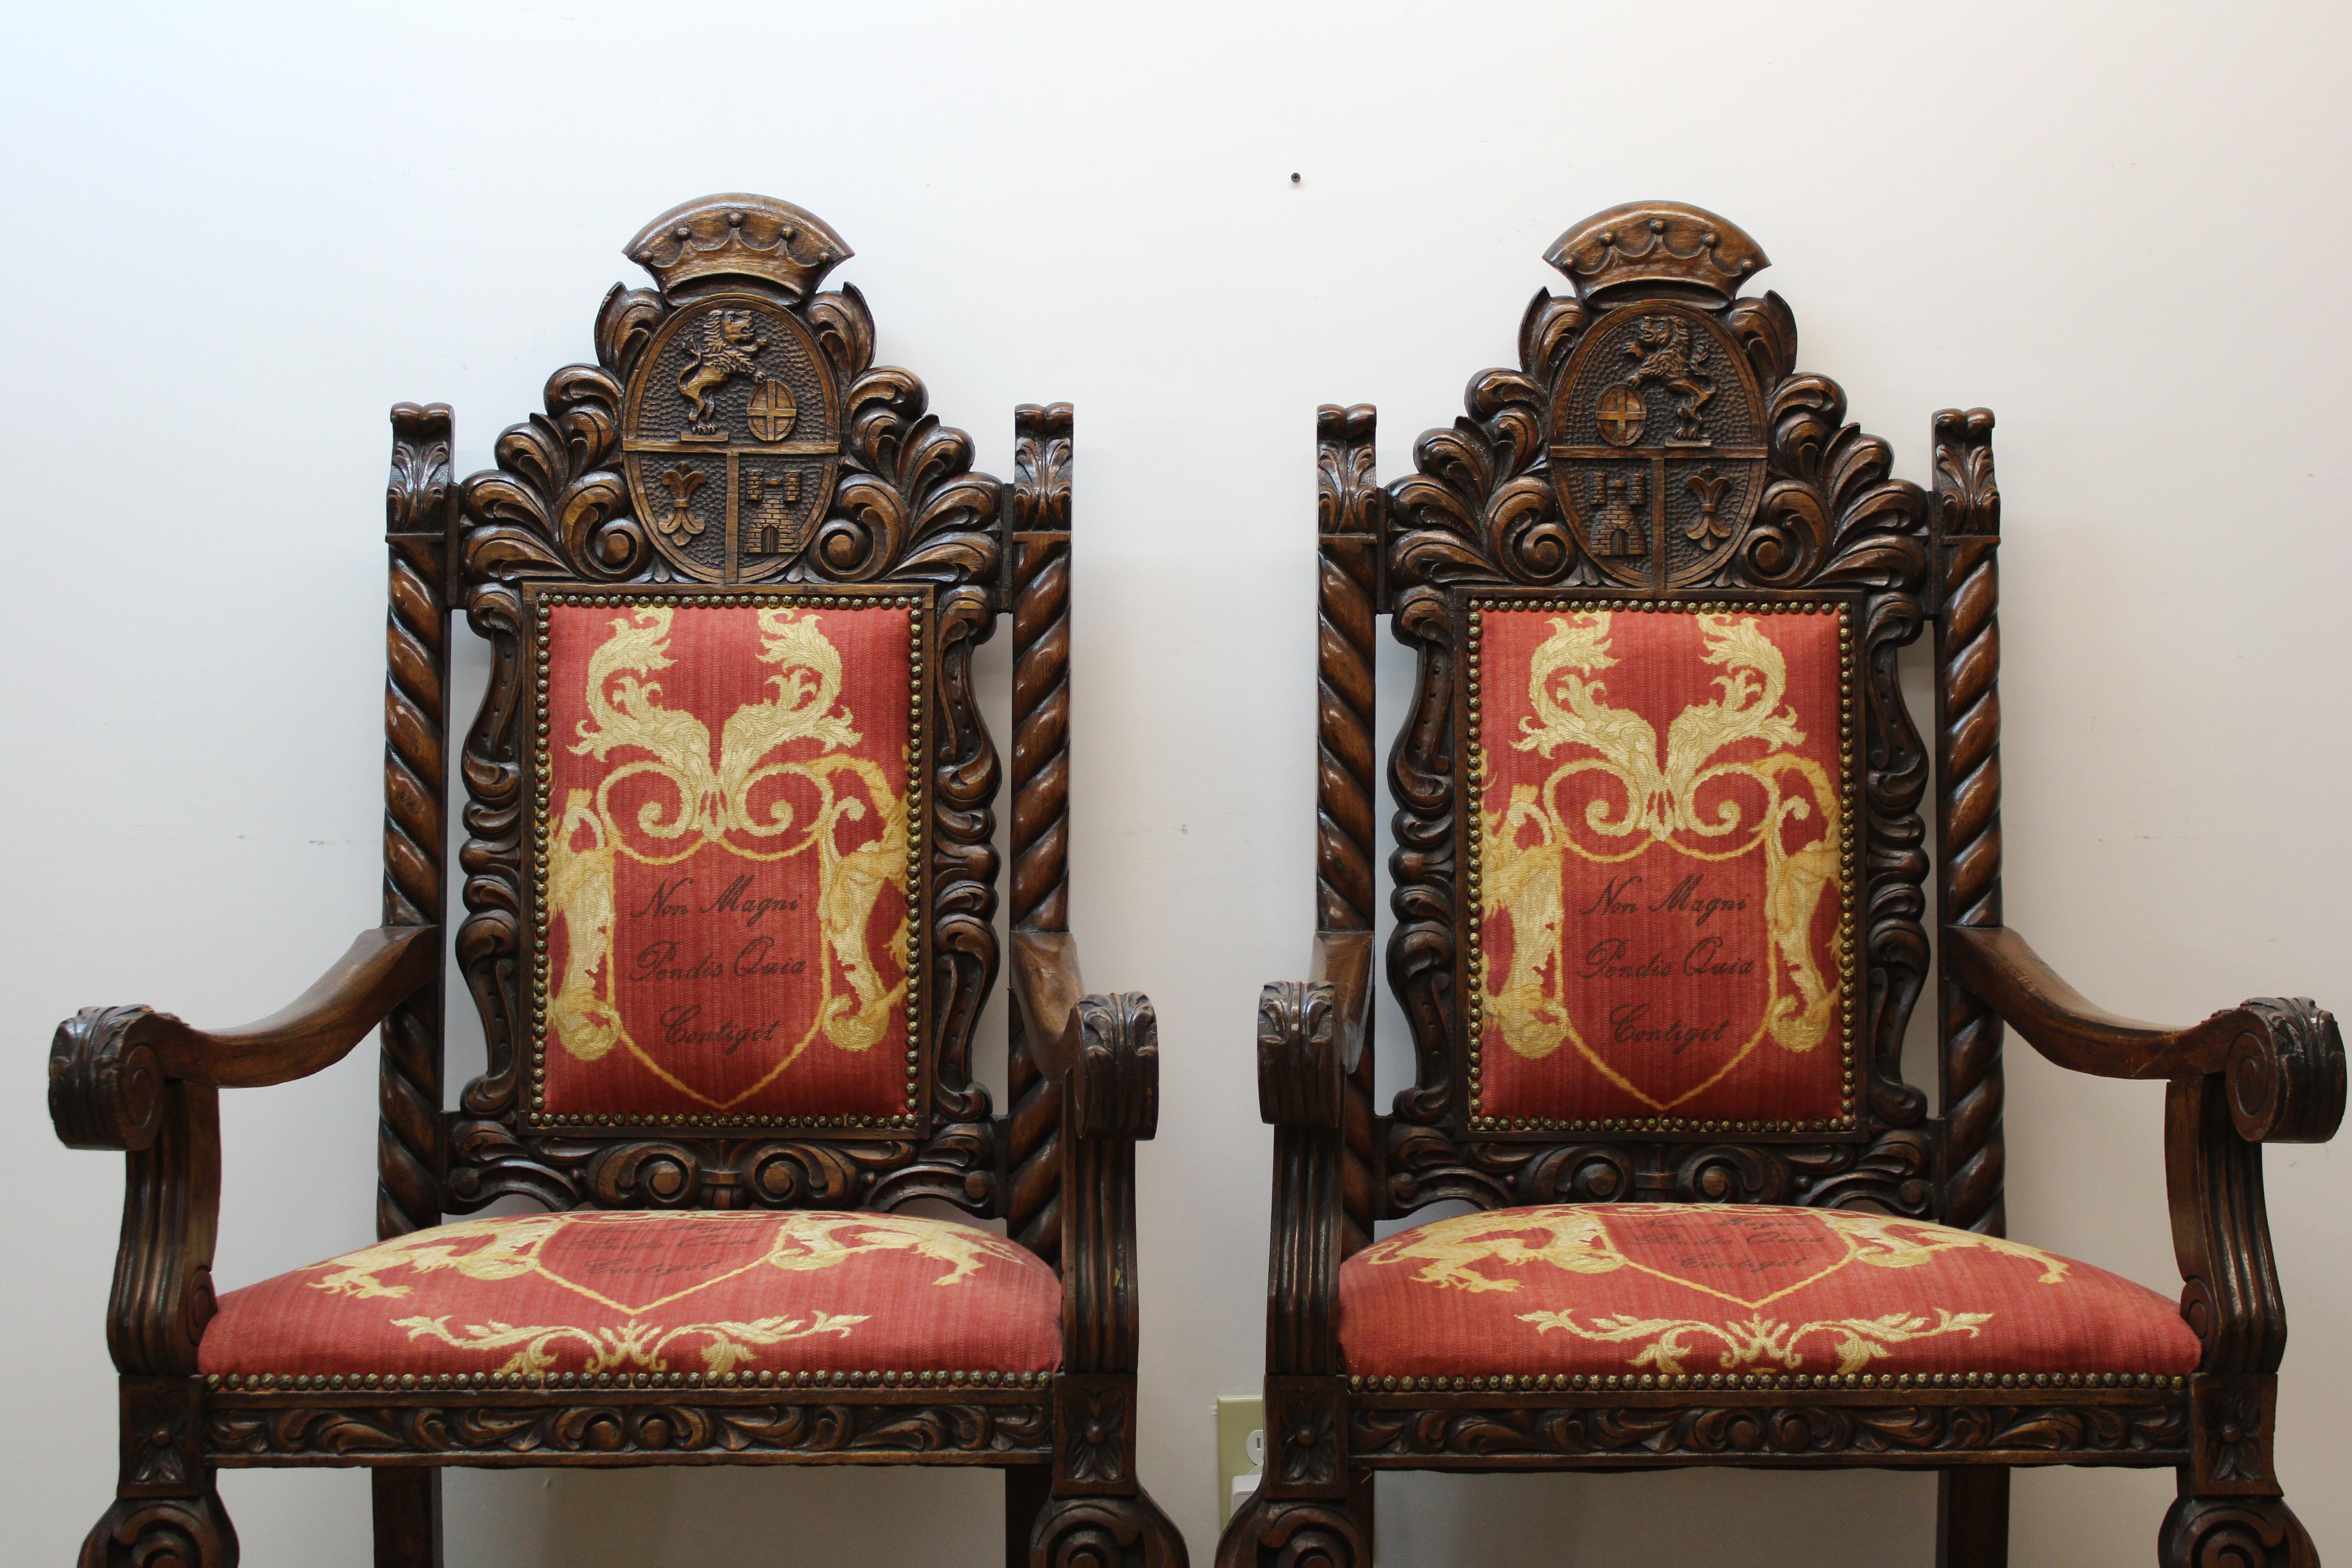 C. late 19th century - early 20th century

Beautiful Spanish colonial hand carved wood w/ crest & paw feet

Red & yellow upholstered ( Worn ) but still in good condition.